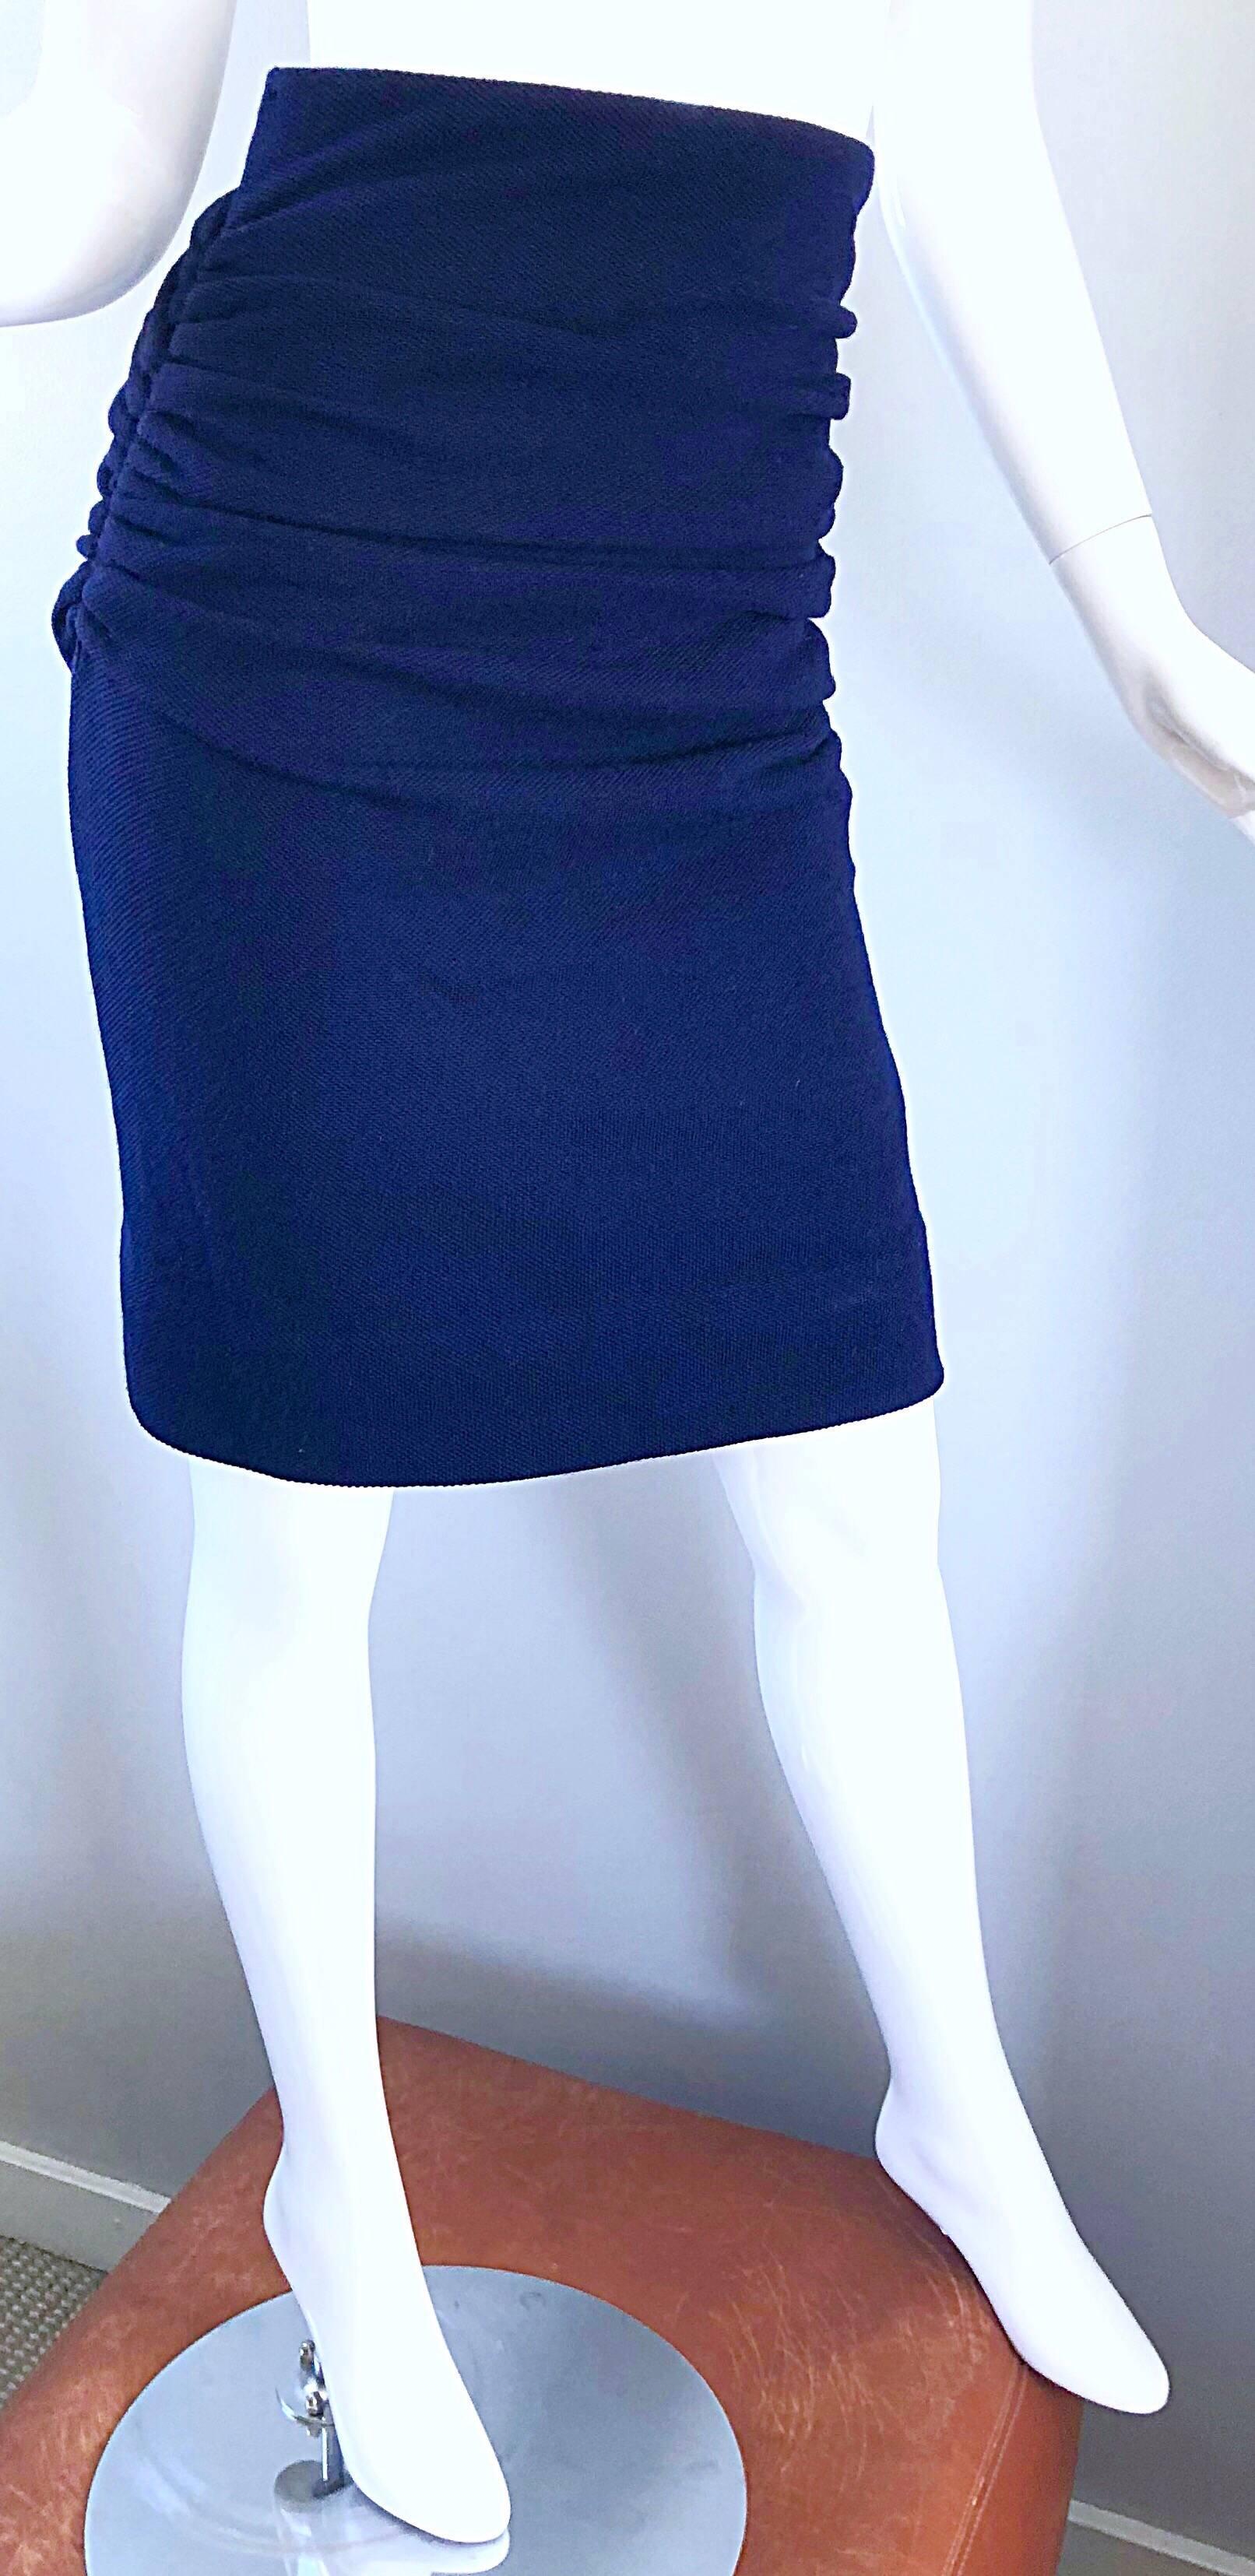 Women's 1990s Karl Lagerfeld High Waisted Navy Blue Wool Ruched 90s VIntage Pencil Skirt For Sale